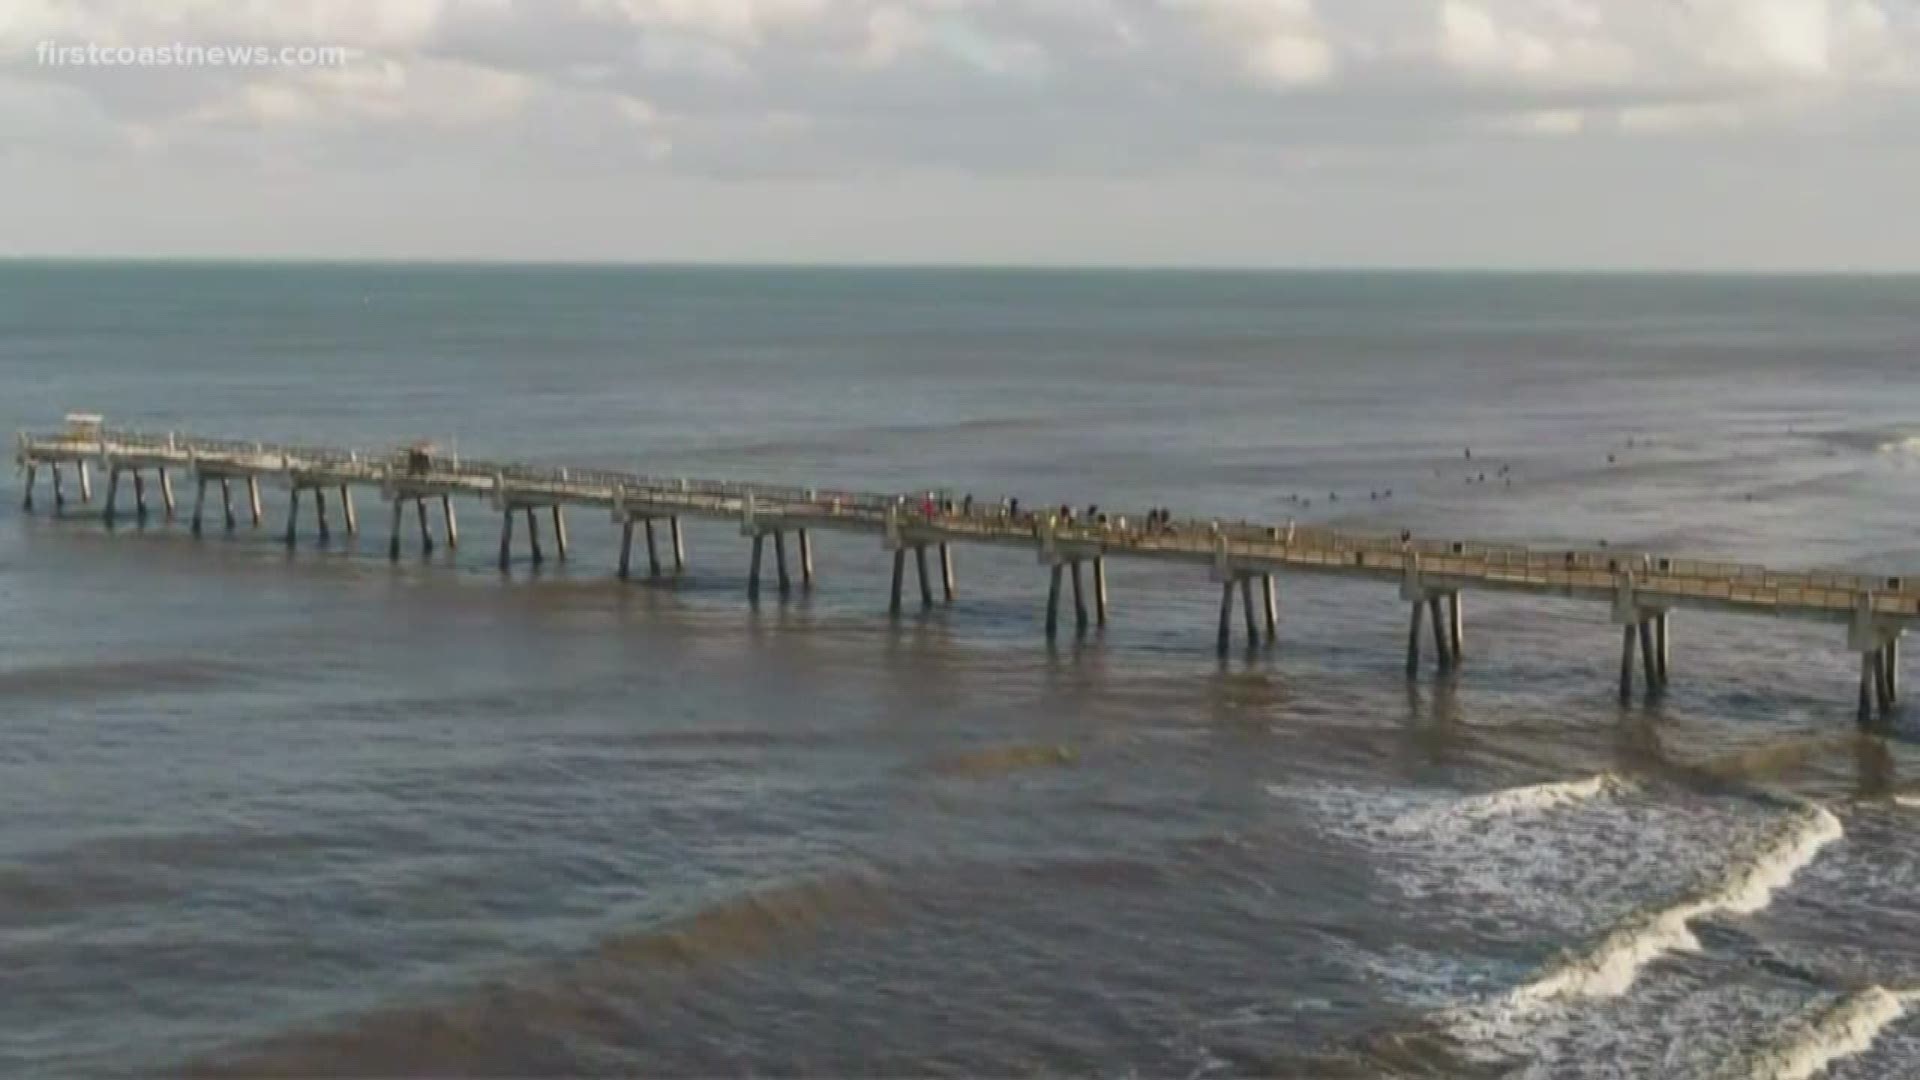 No timetable has been released as to when the full pier will be reopened.